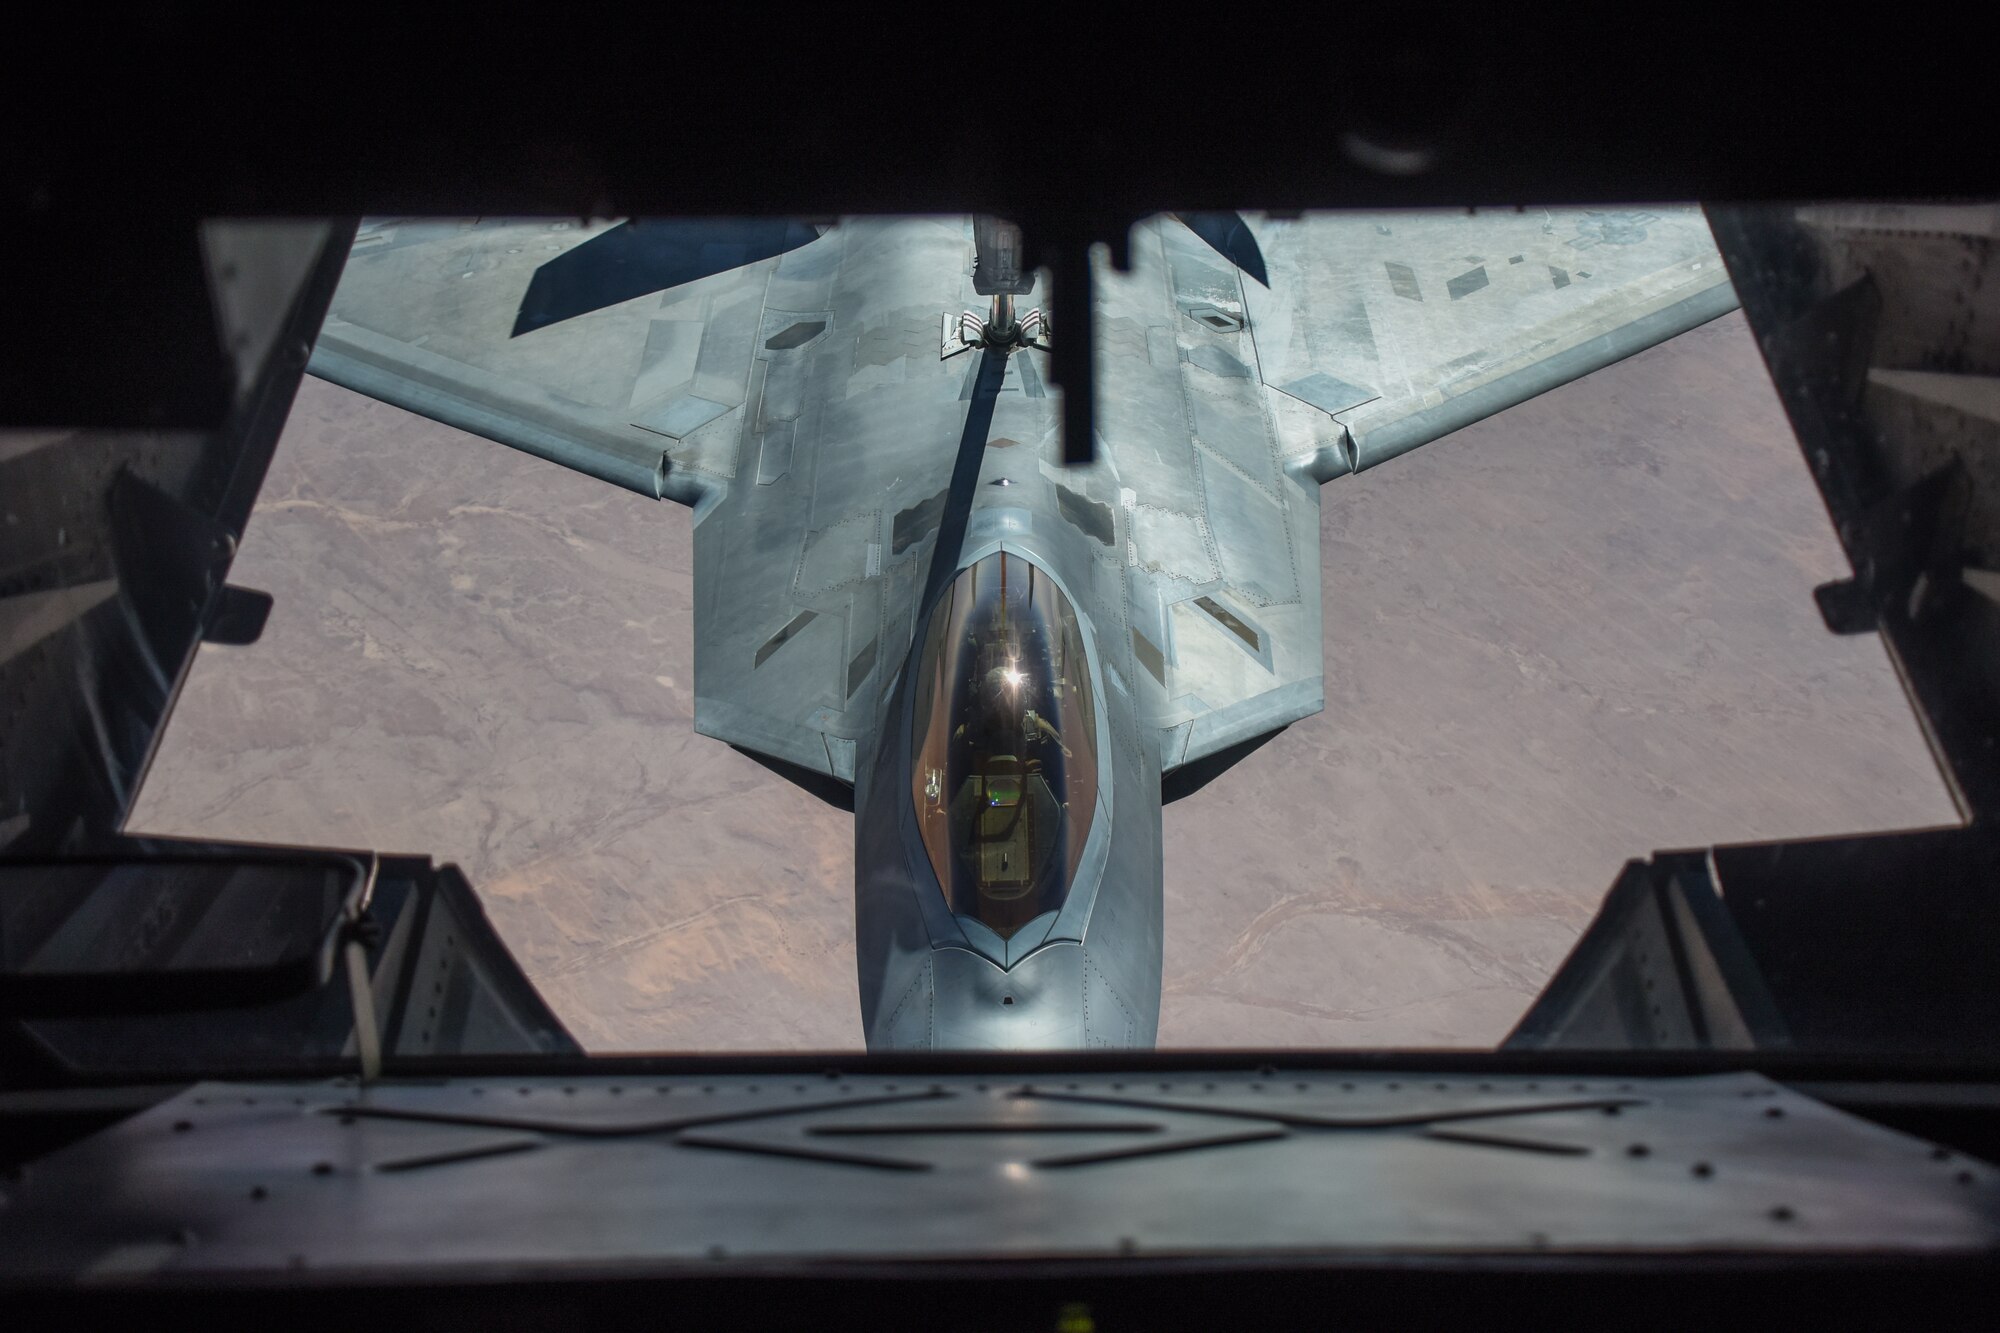 An U.S Air Force F-22 Raptor receives fuel from a KC-10 Extender during a mission in support of Operation Inherent Resolve over Syria, Feb. 2, 2018. The F-22's combination of reduced observability and supercruise accentuates the advantage of surprise in a tactical environment. (U.S. Air National Guard photo by Staff Sgt. Colton Elliott)